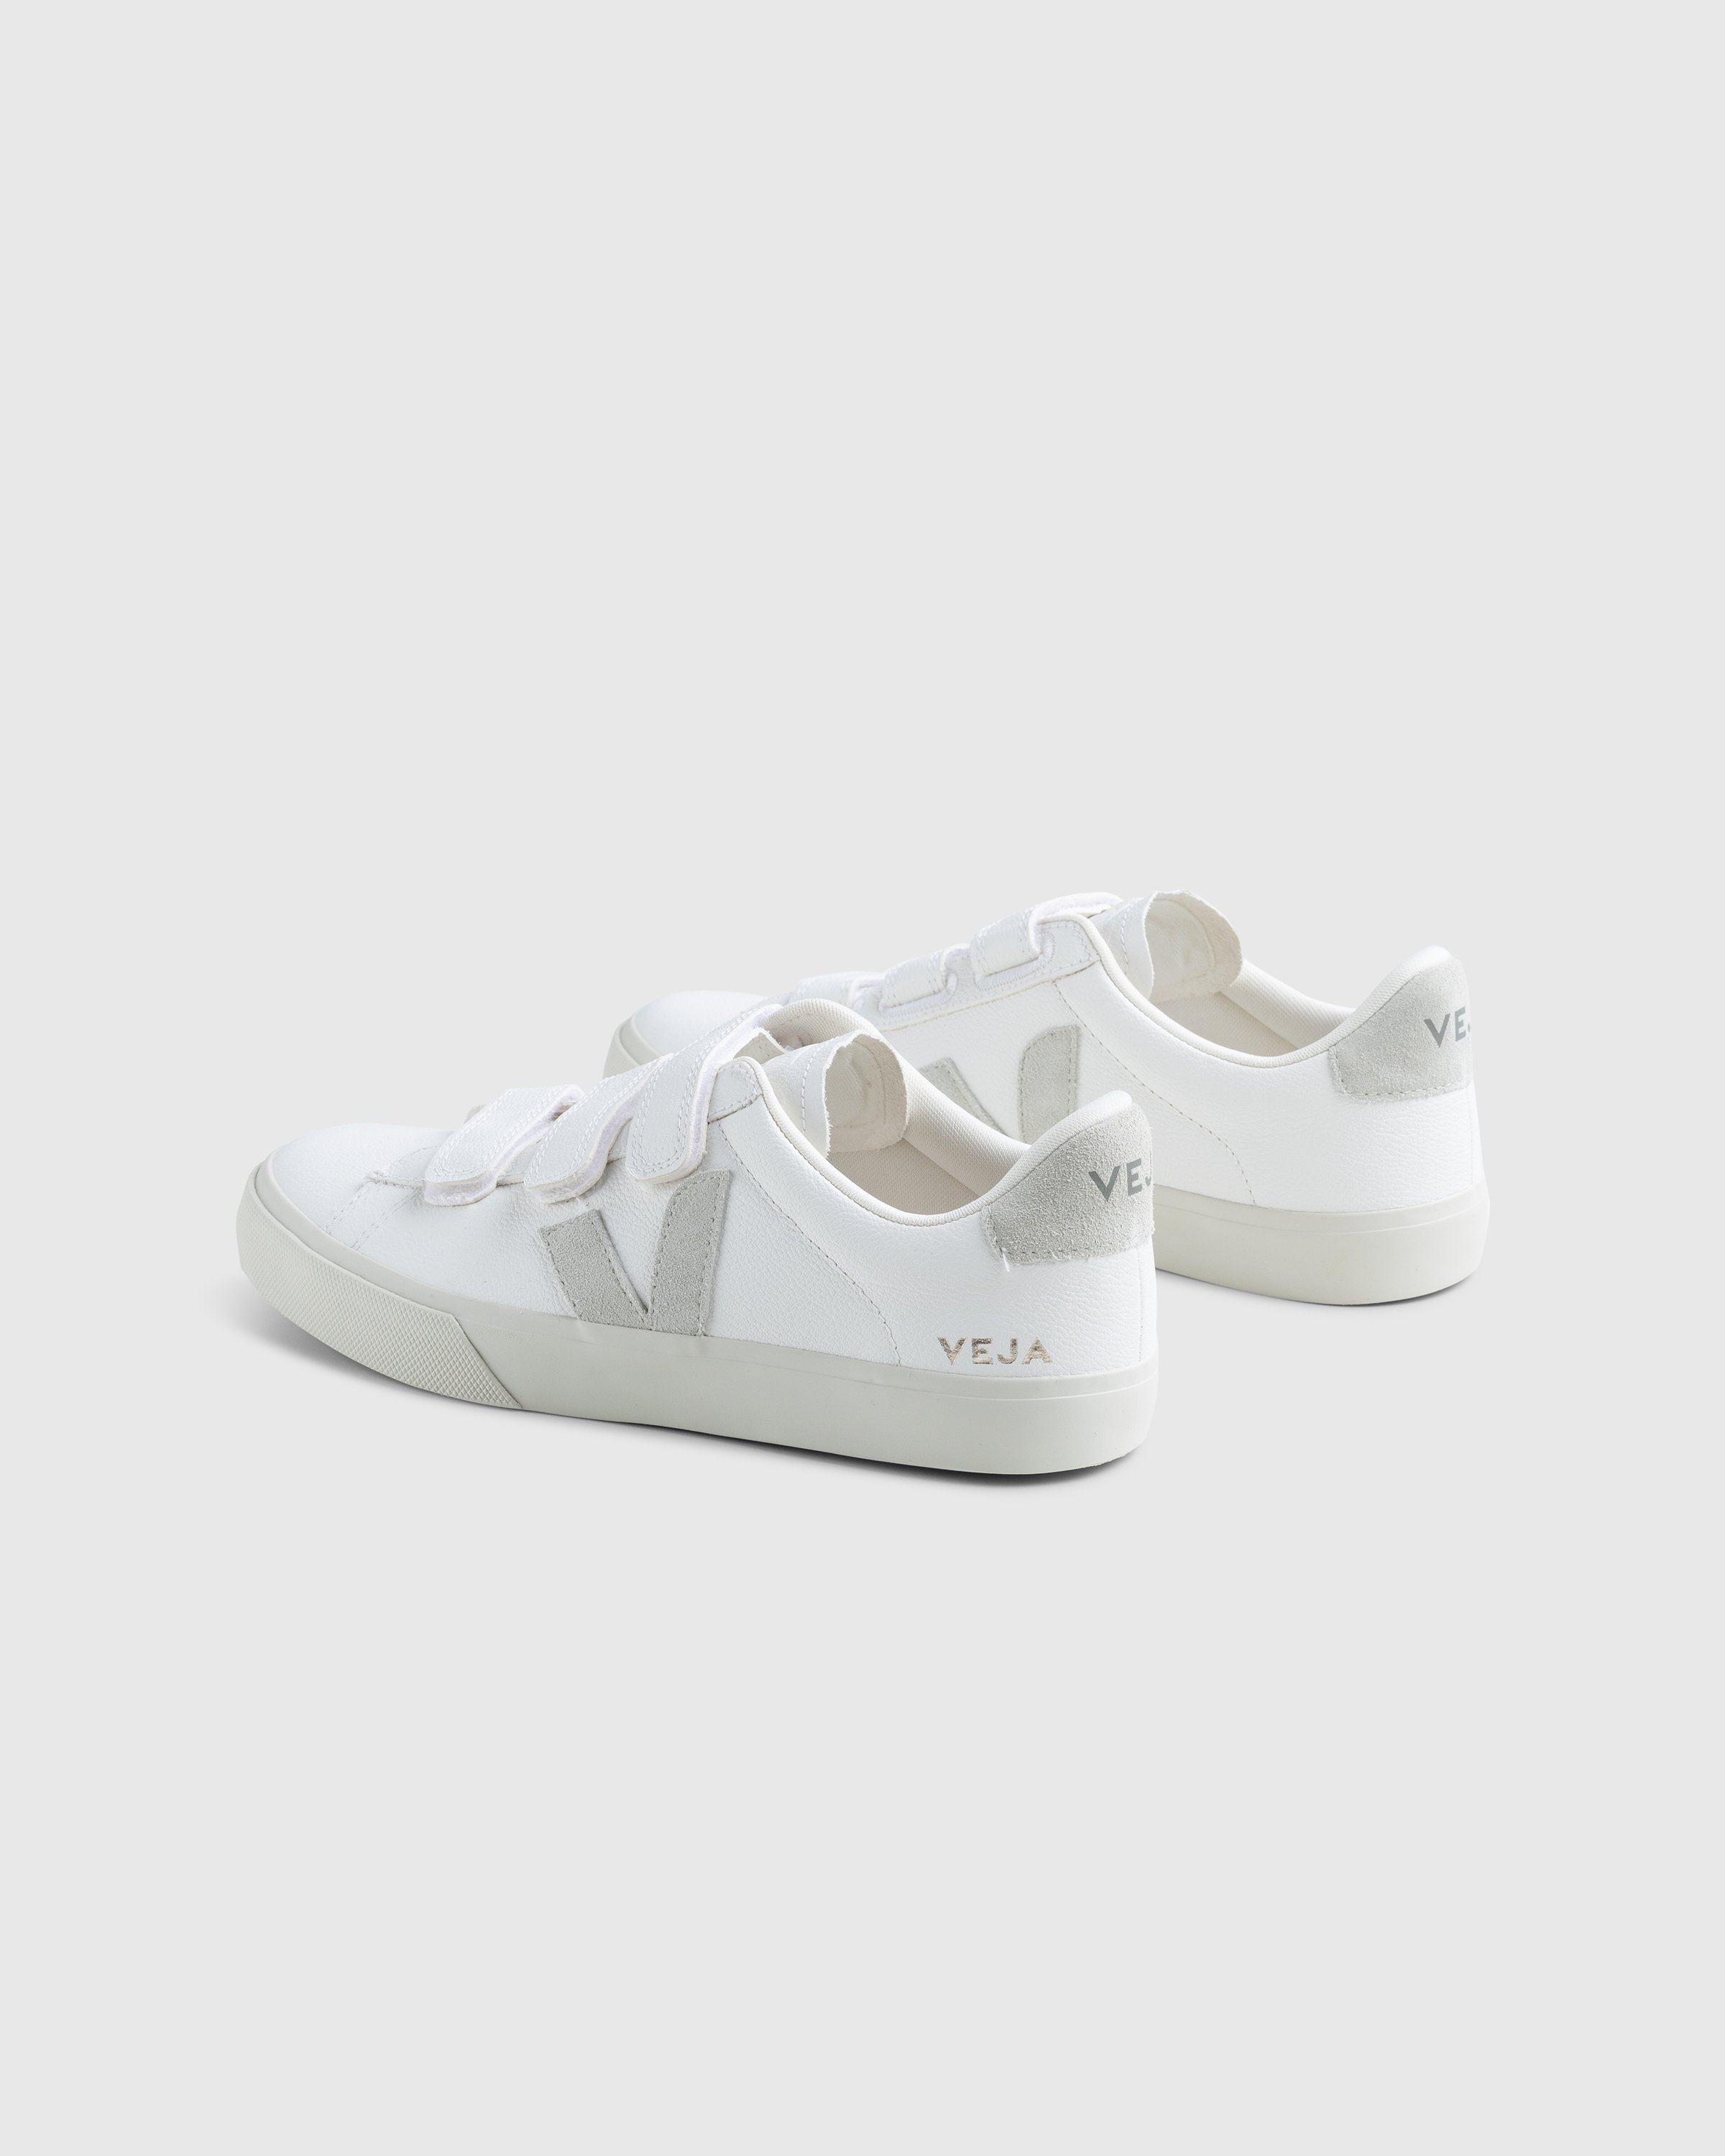 VEJA - Recife Chrome-Free Leather White/Natural - Footwear - White - Image 4